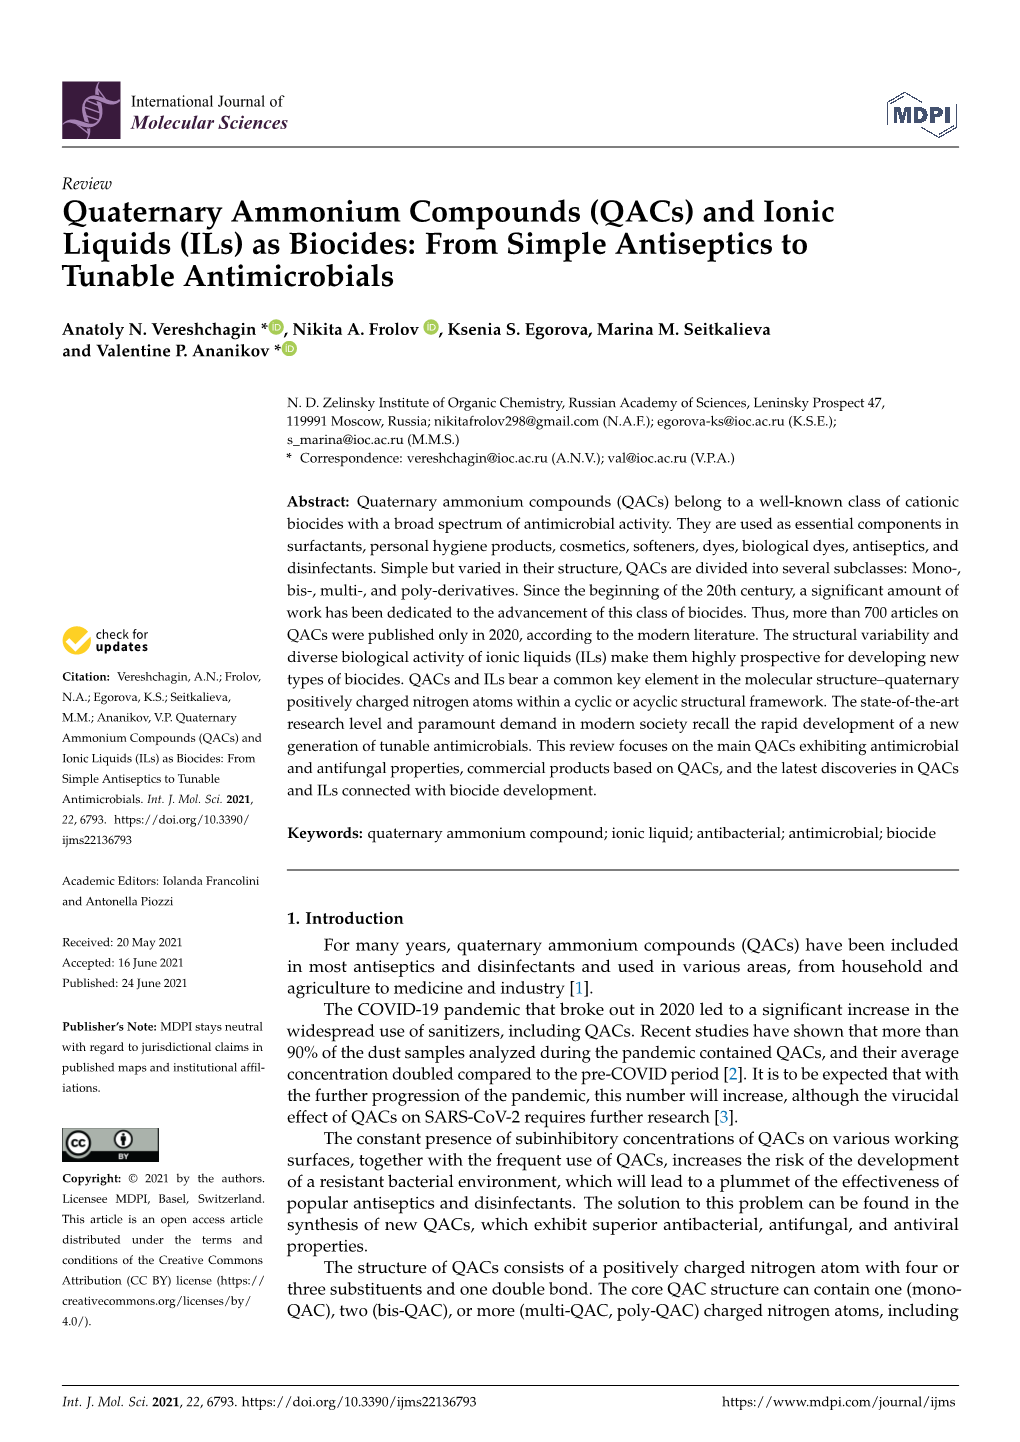 Quaternary Ammonium Compounds (Qacs) and Ionic Liquids (Ils) As Biocides: from Simple Antiseptics to Tunable Antimicrobials